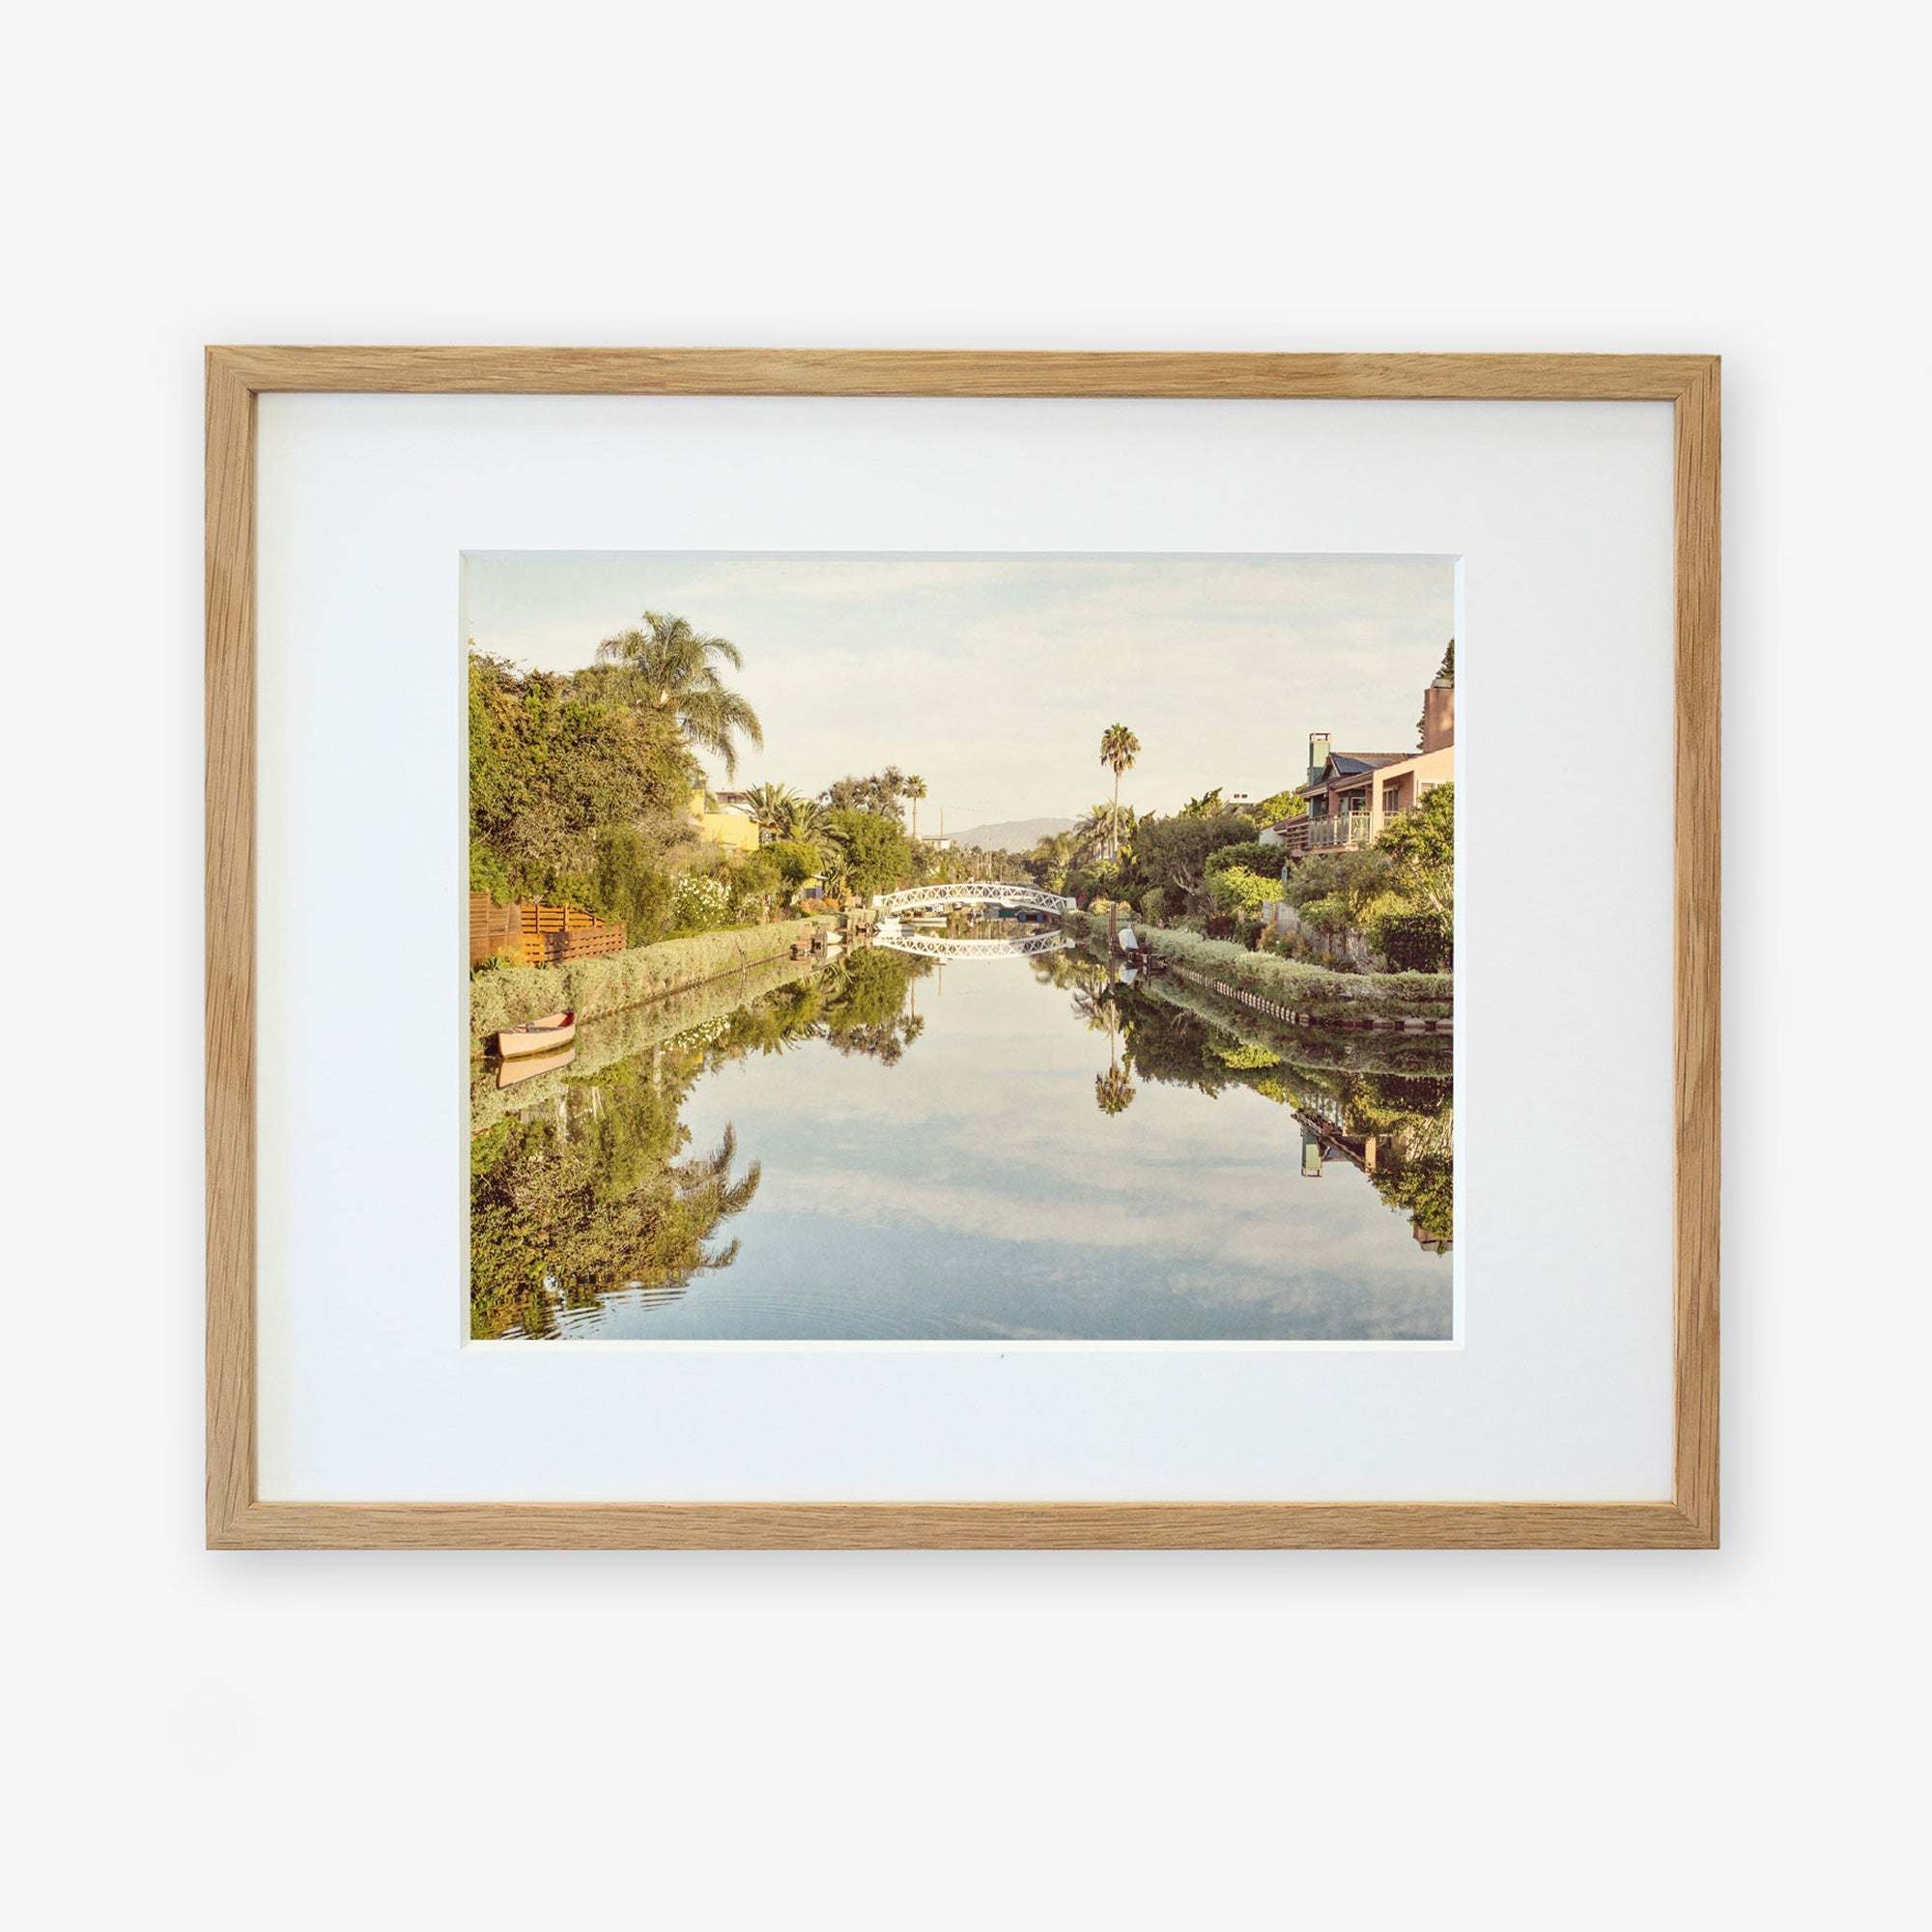 A framed photograph depicting the Venice Beach Canals, printed on archival photographic paper by Offley Green.